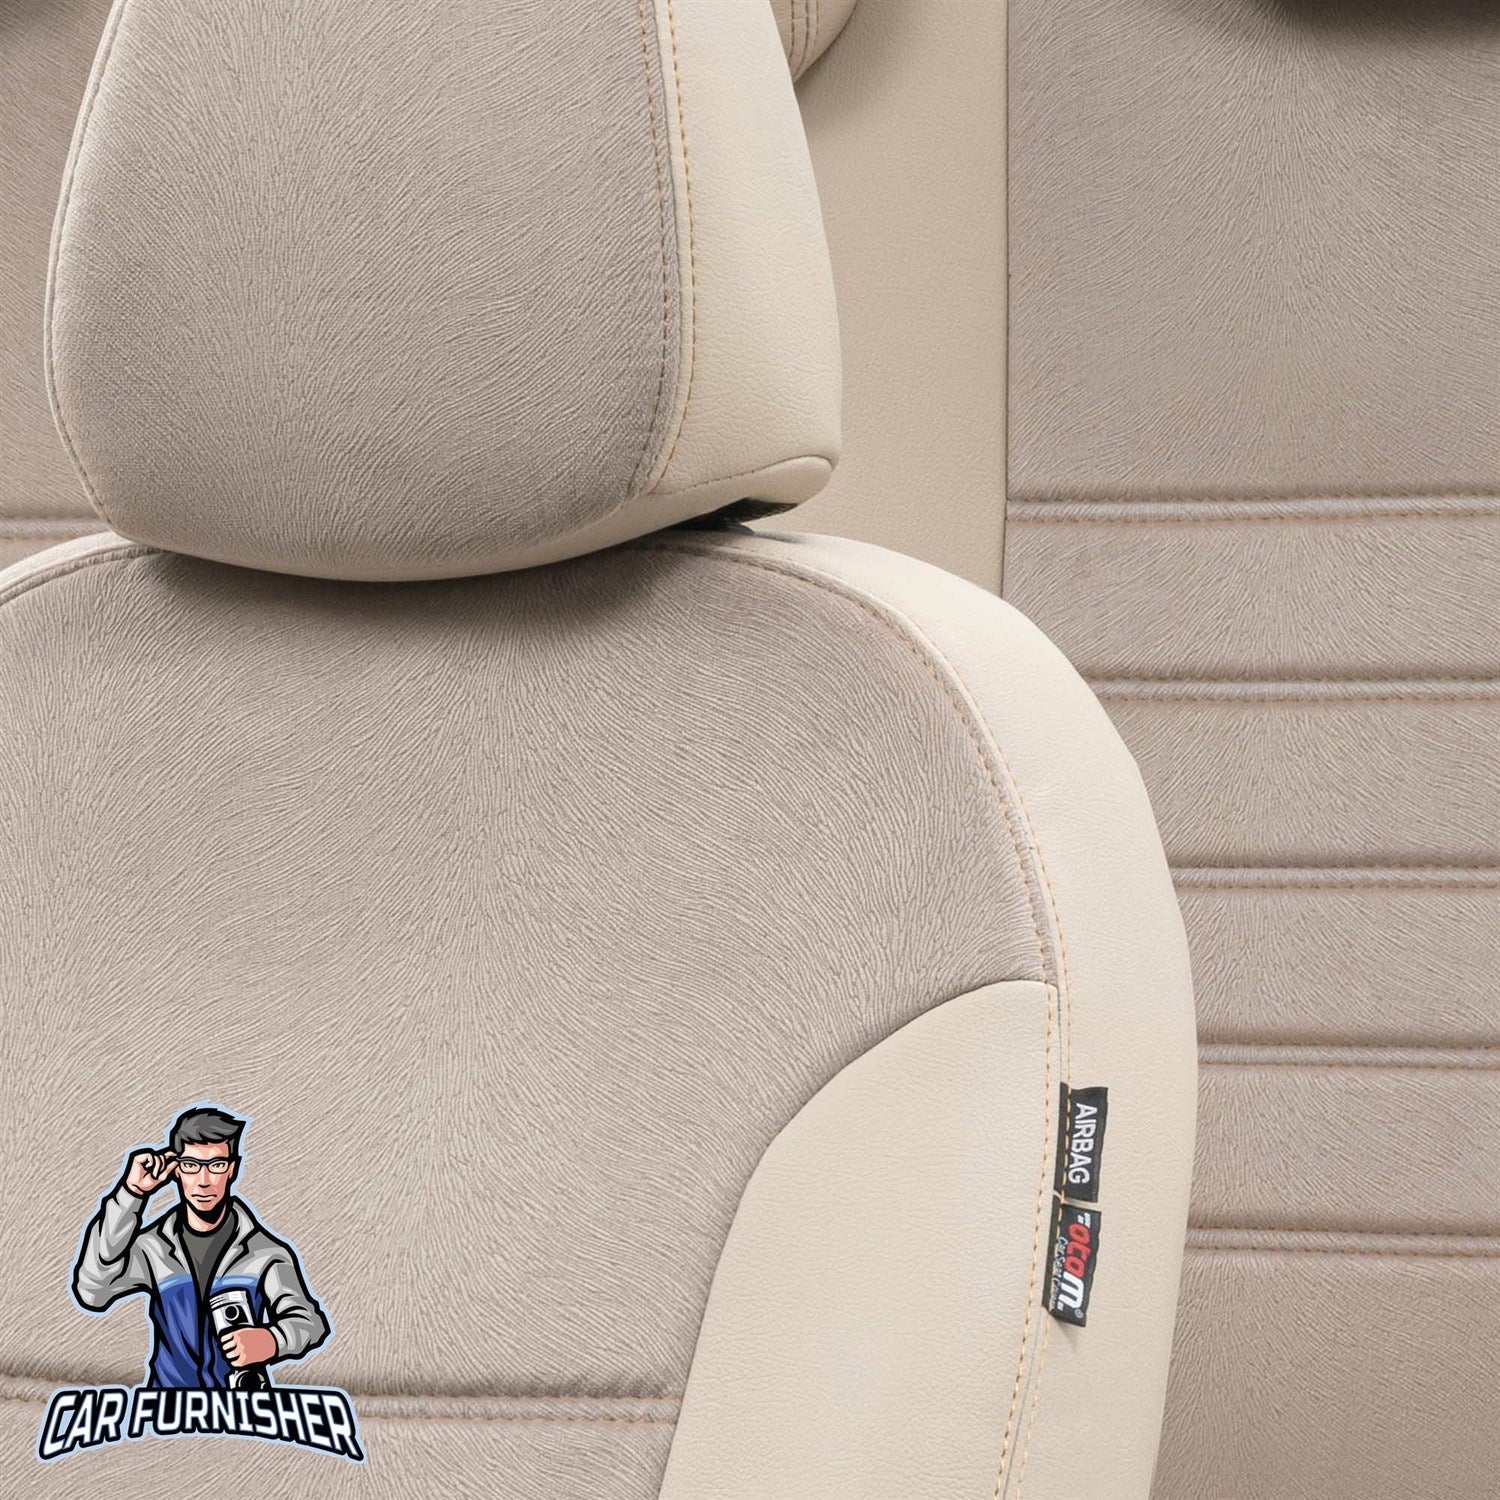 Ssangyong Kyron Seat Covers London Foal Feather Design Beige Leather & Foal Feather